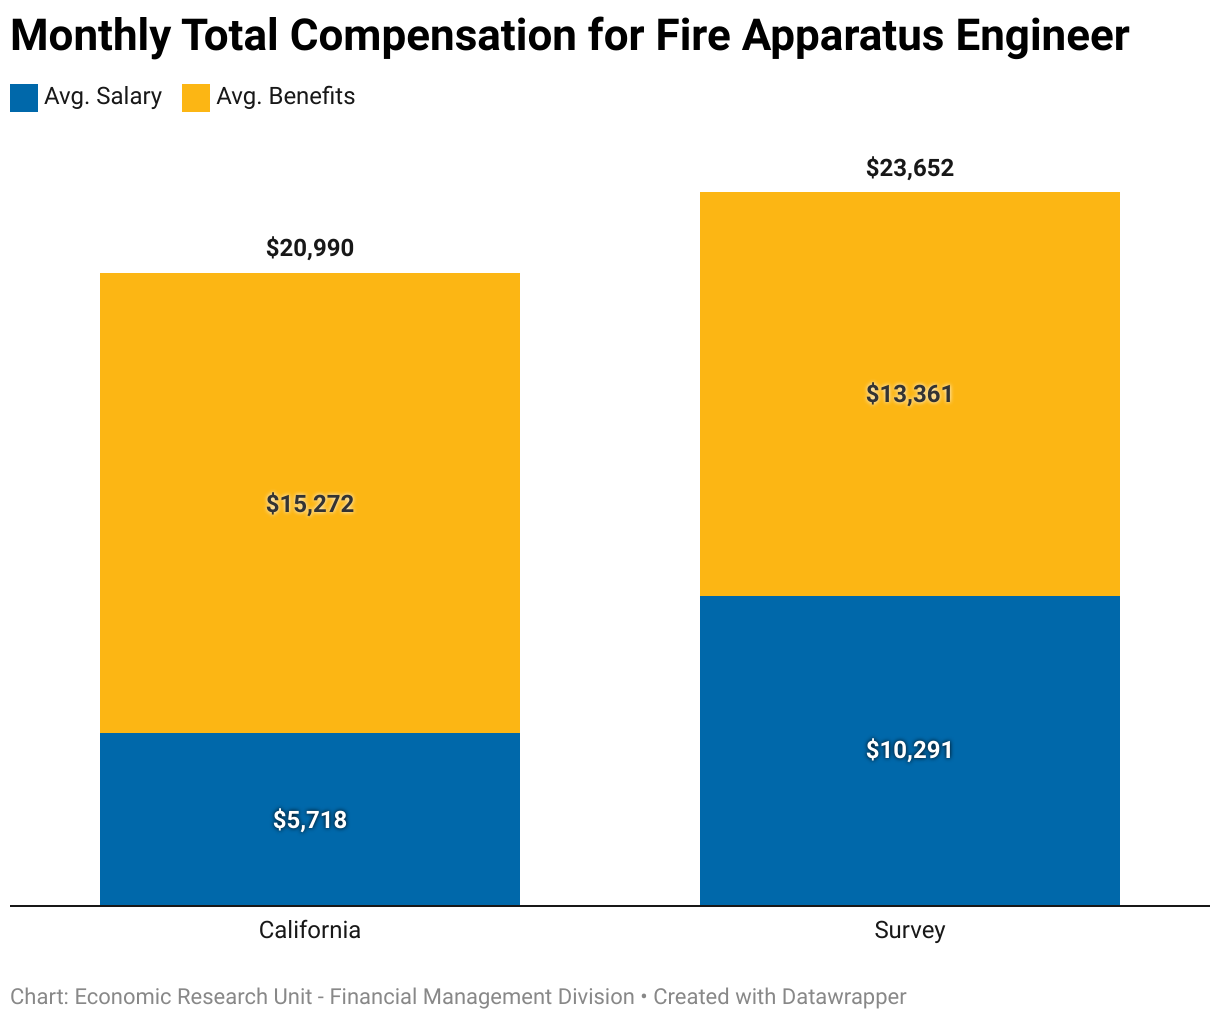 This chart compares the average monthly compensation for Fire Apparatus Engineer across State and local firefighters. The average monthly compensation for State firefighters was $20,990 ($5,718 in salary and $15,272 in benefits). The average monthly compensation for local fighters was $23,652 ($10,291 in salary and $13,361 in benefits).